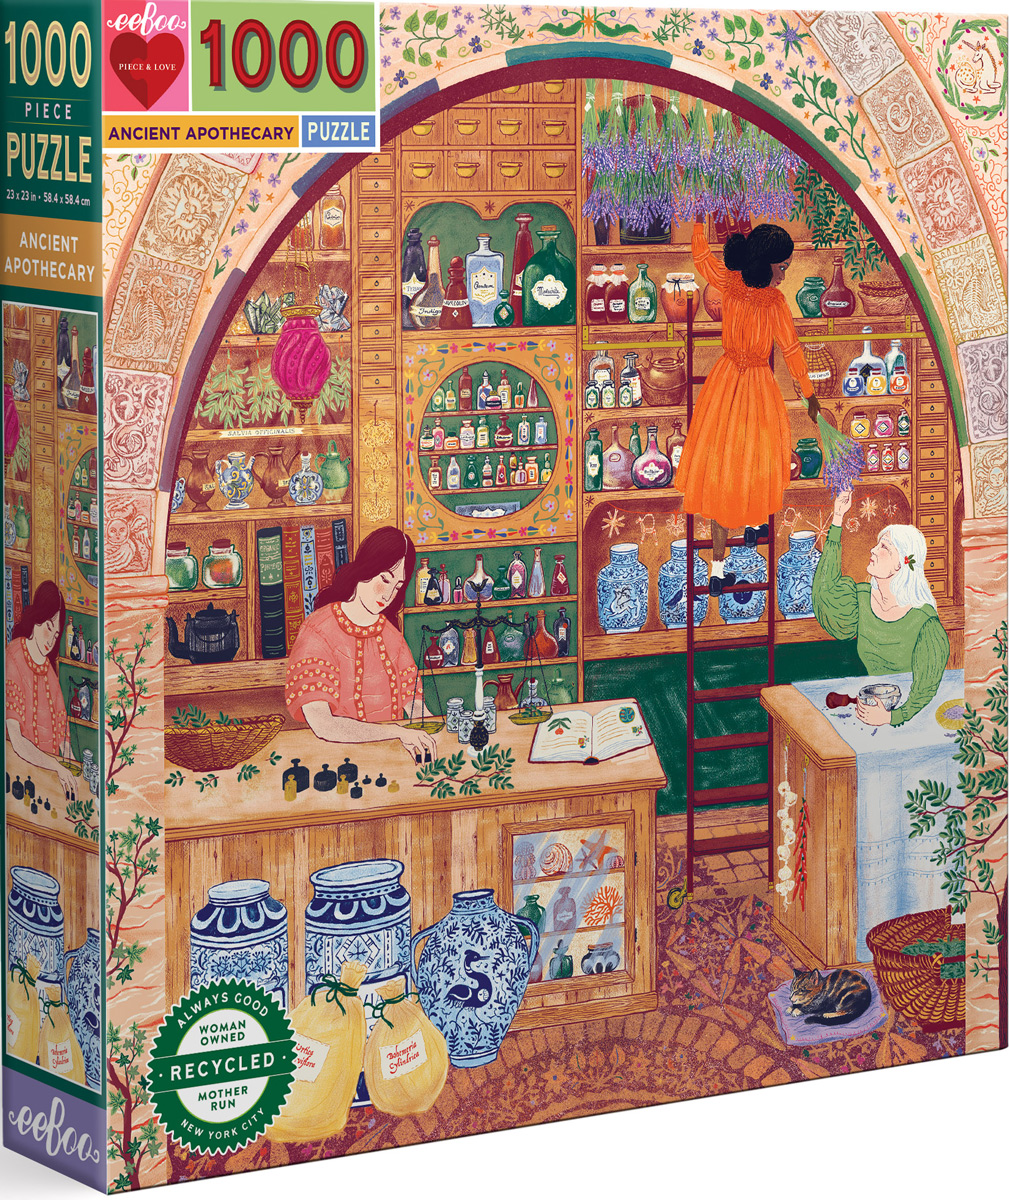 Ancient Apothecary Science Jigsaw Puzzle